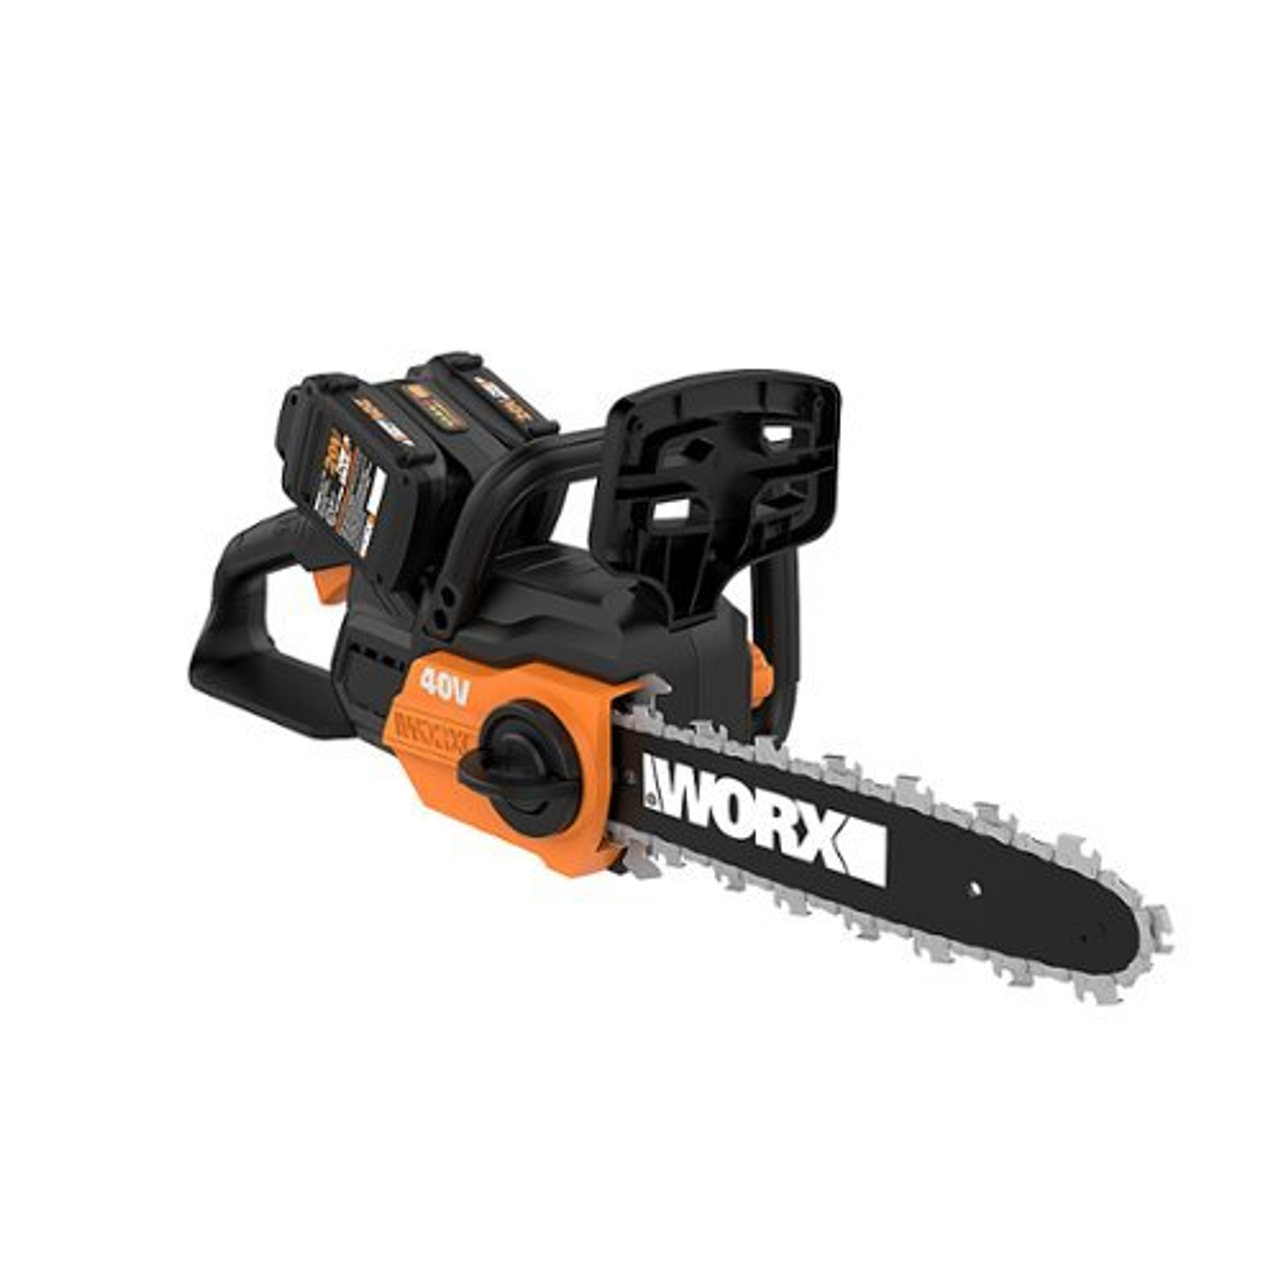 Worx WG381 40V Power Share 12" Cordless Chainsaw w/ Auto Tension (Two Batteries & Charger Included) - Black